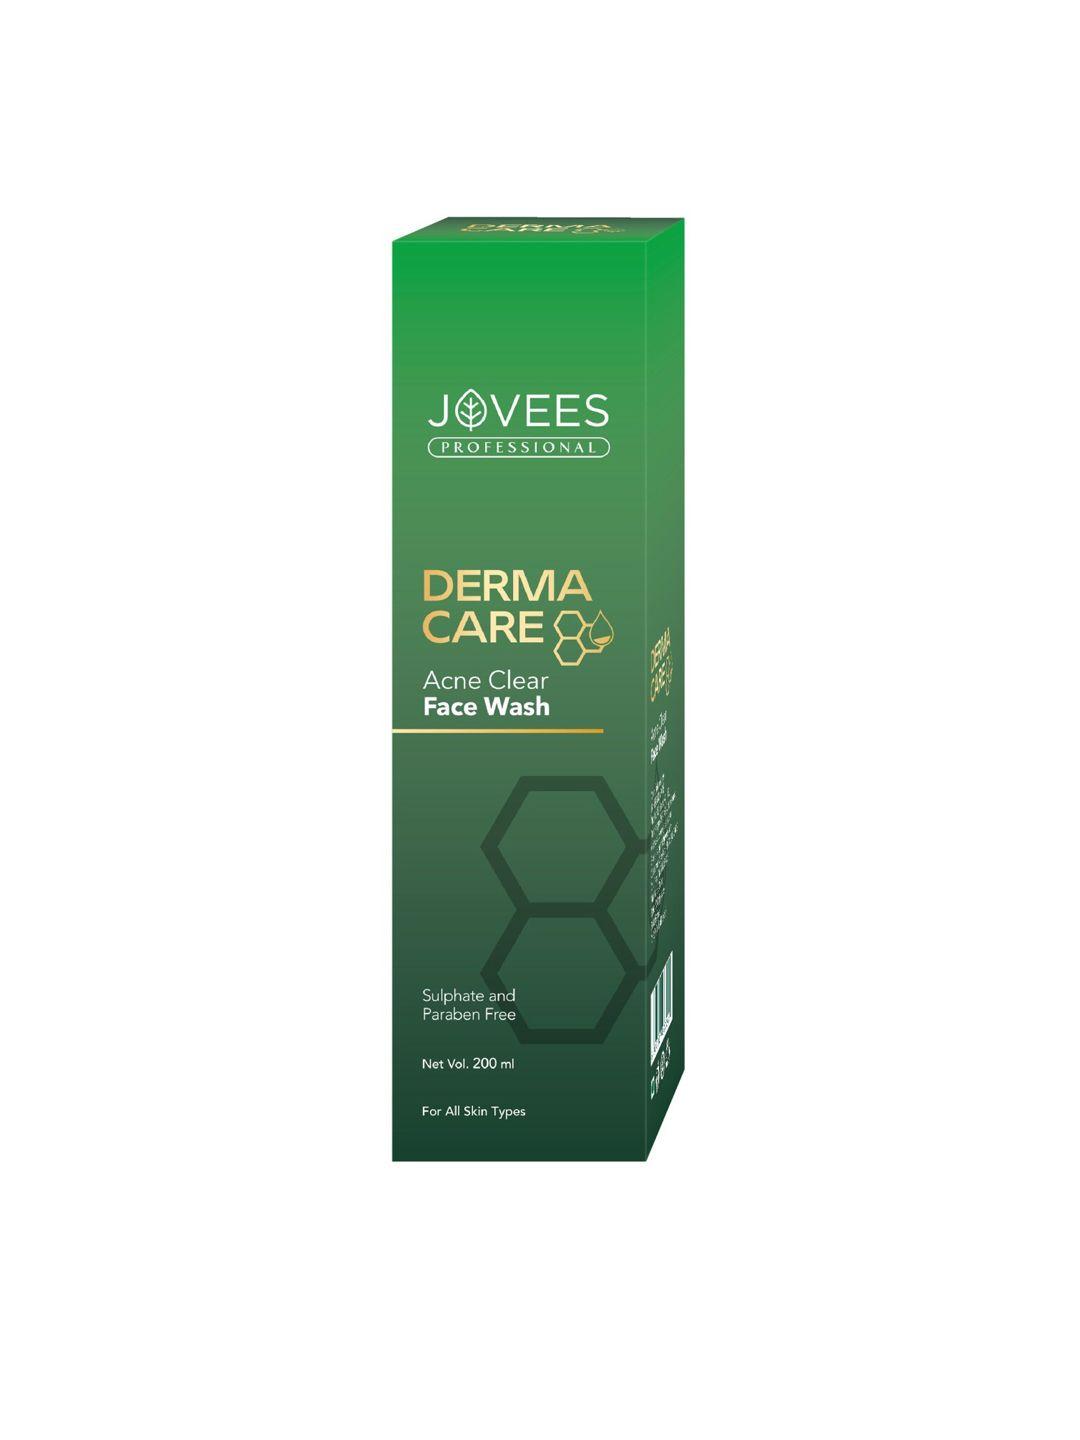 jovees derma care acne clear face wash for all skin types - 200ml